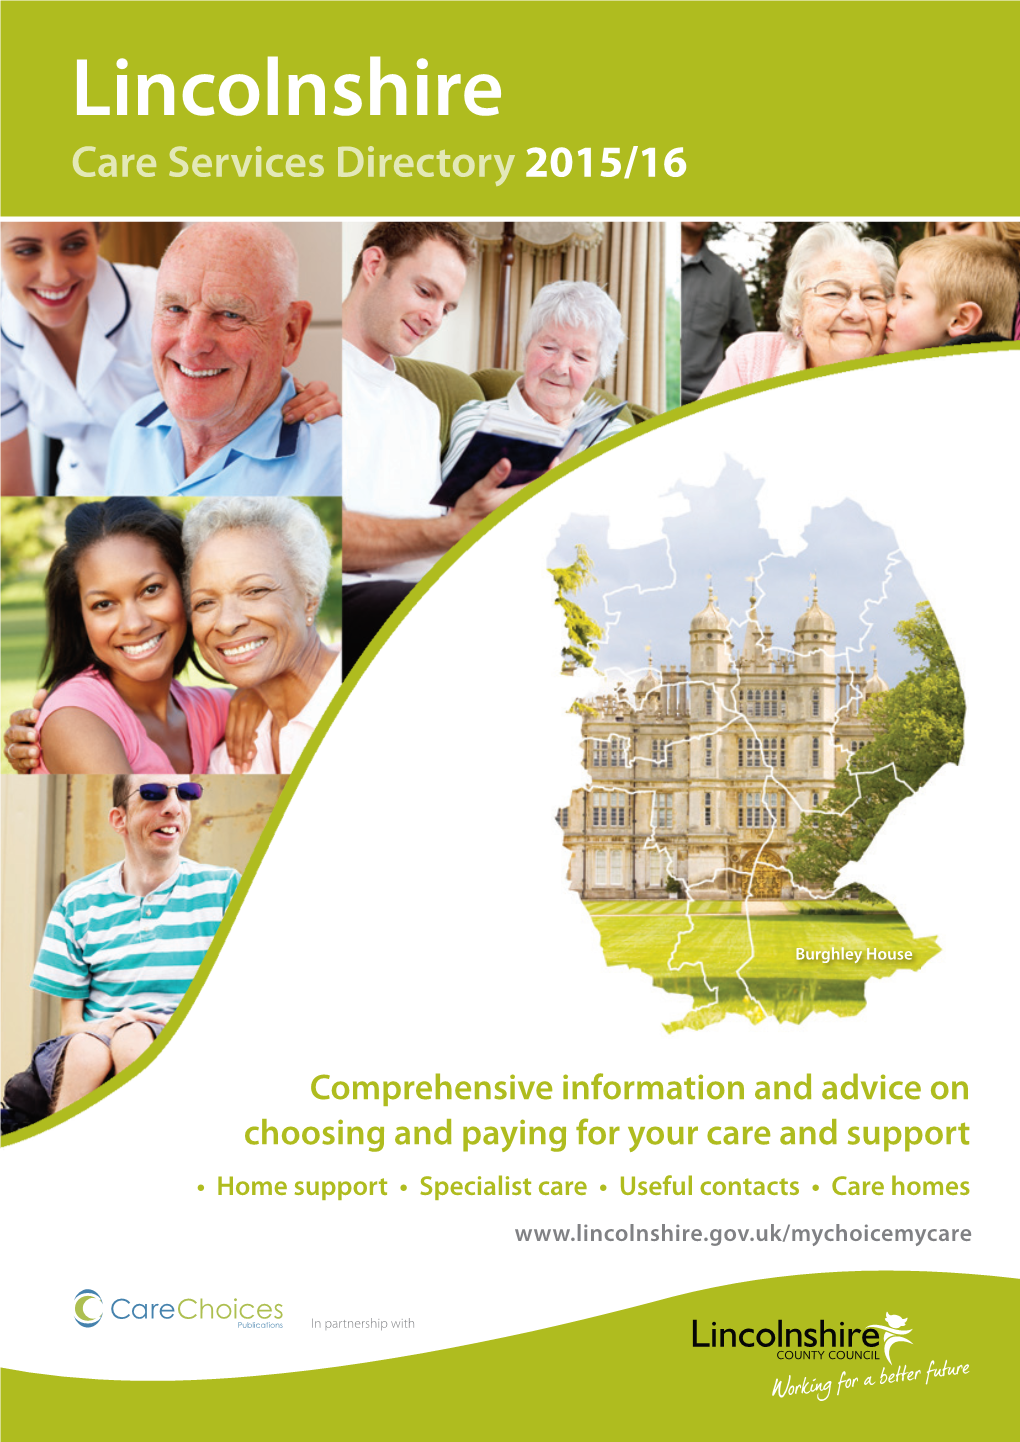 Lincolnshire Care Services Directory 2015/16